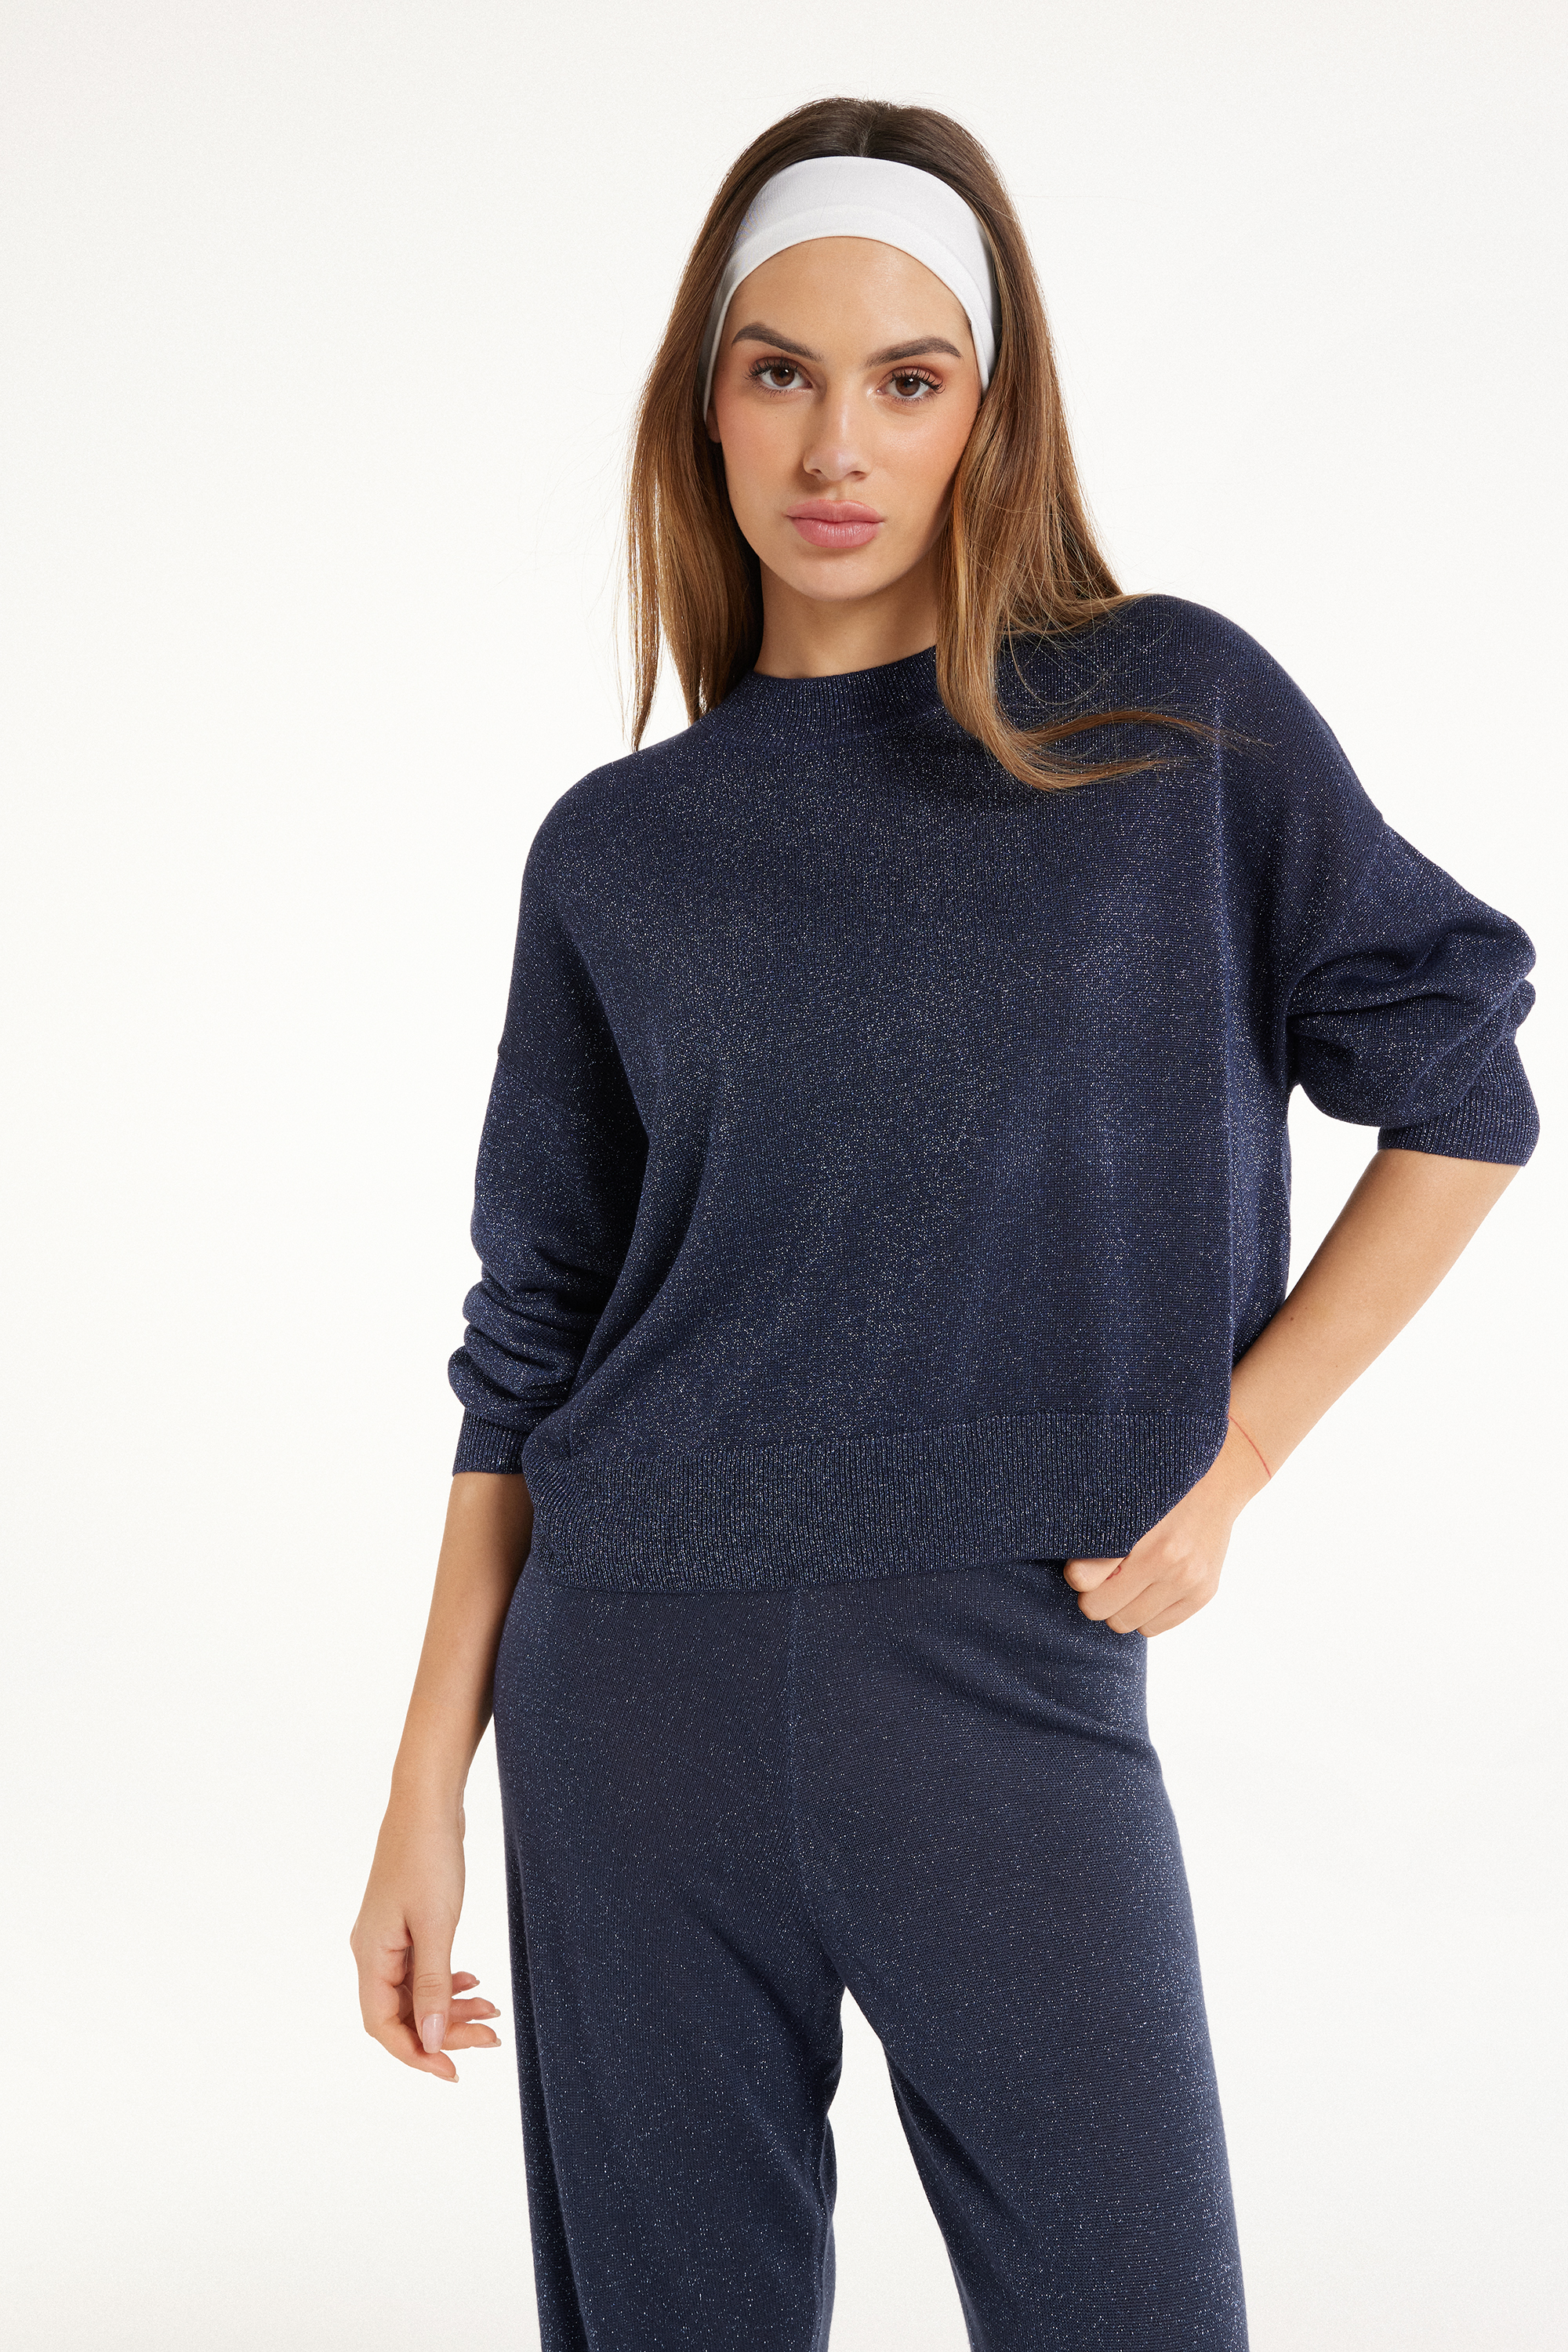 Long-Sleeved Lamé Fabric Top with Rounded Neck and Dropped Shoulders